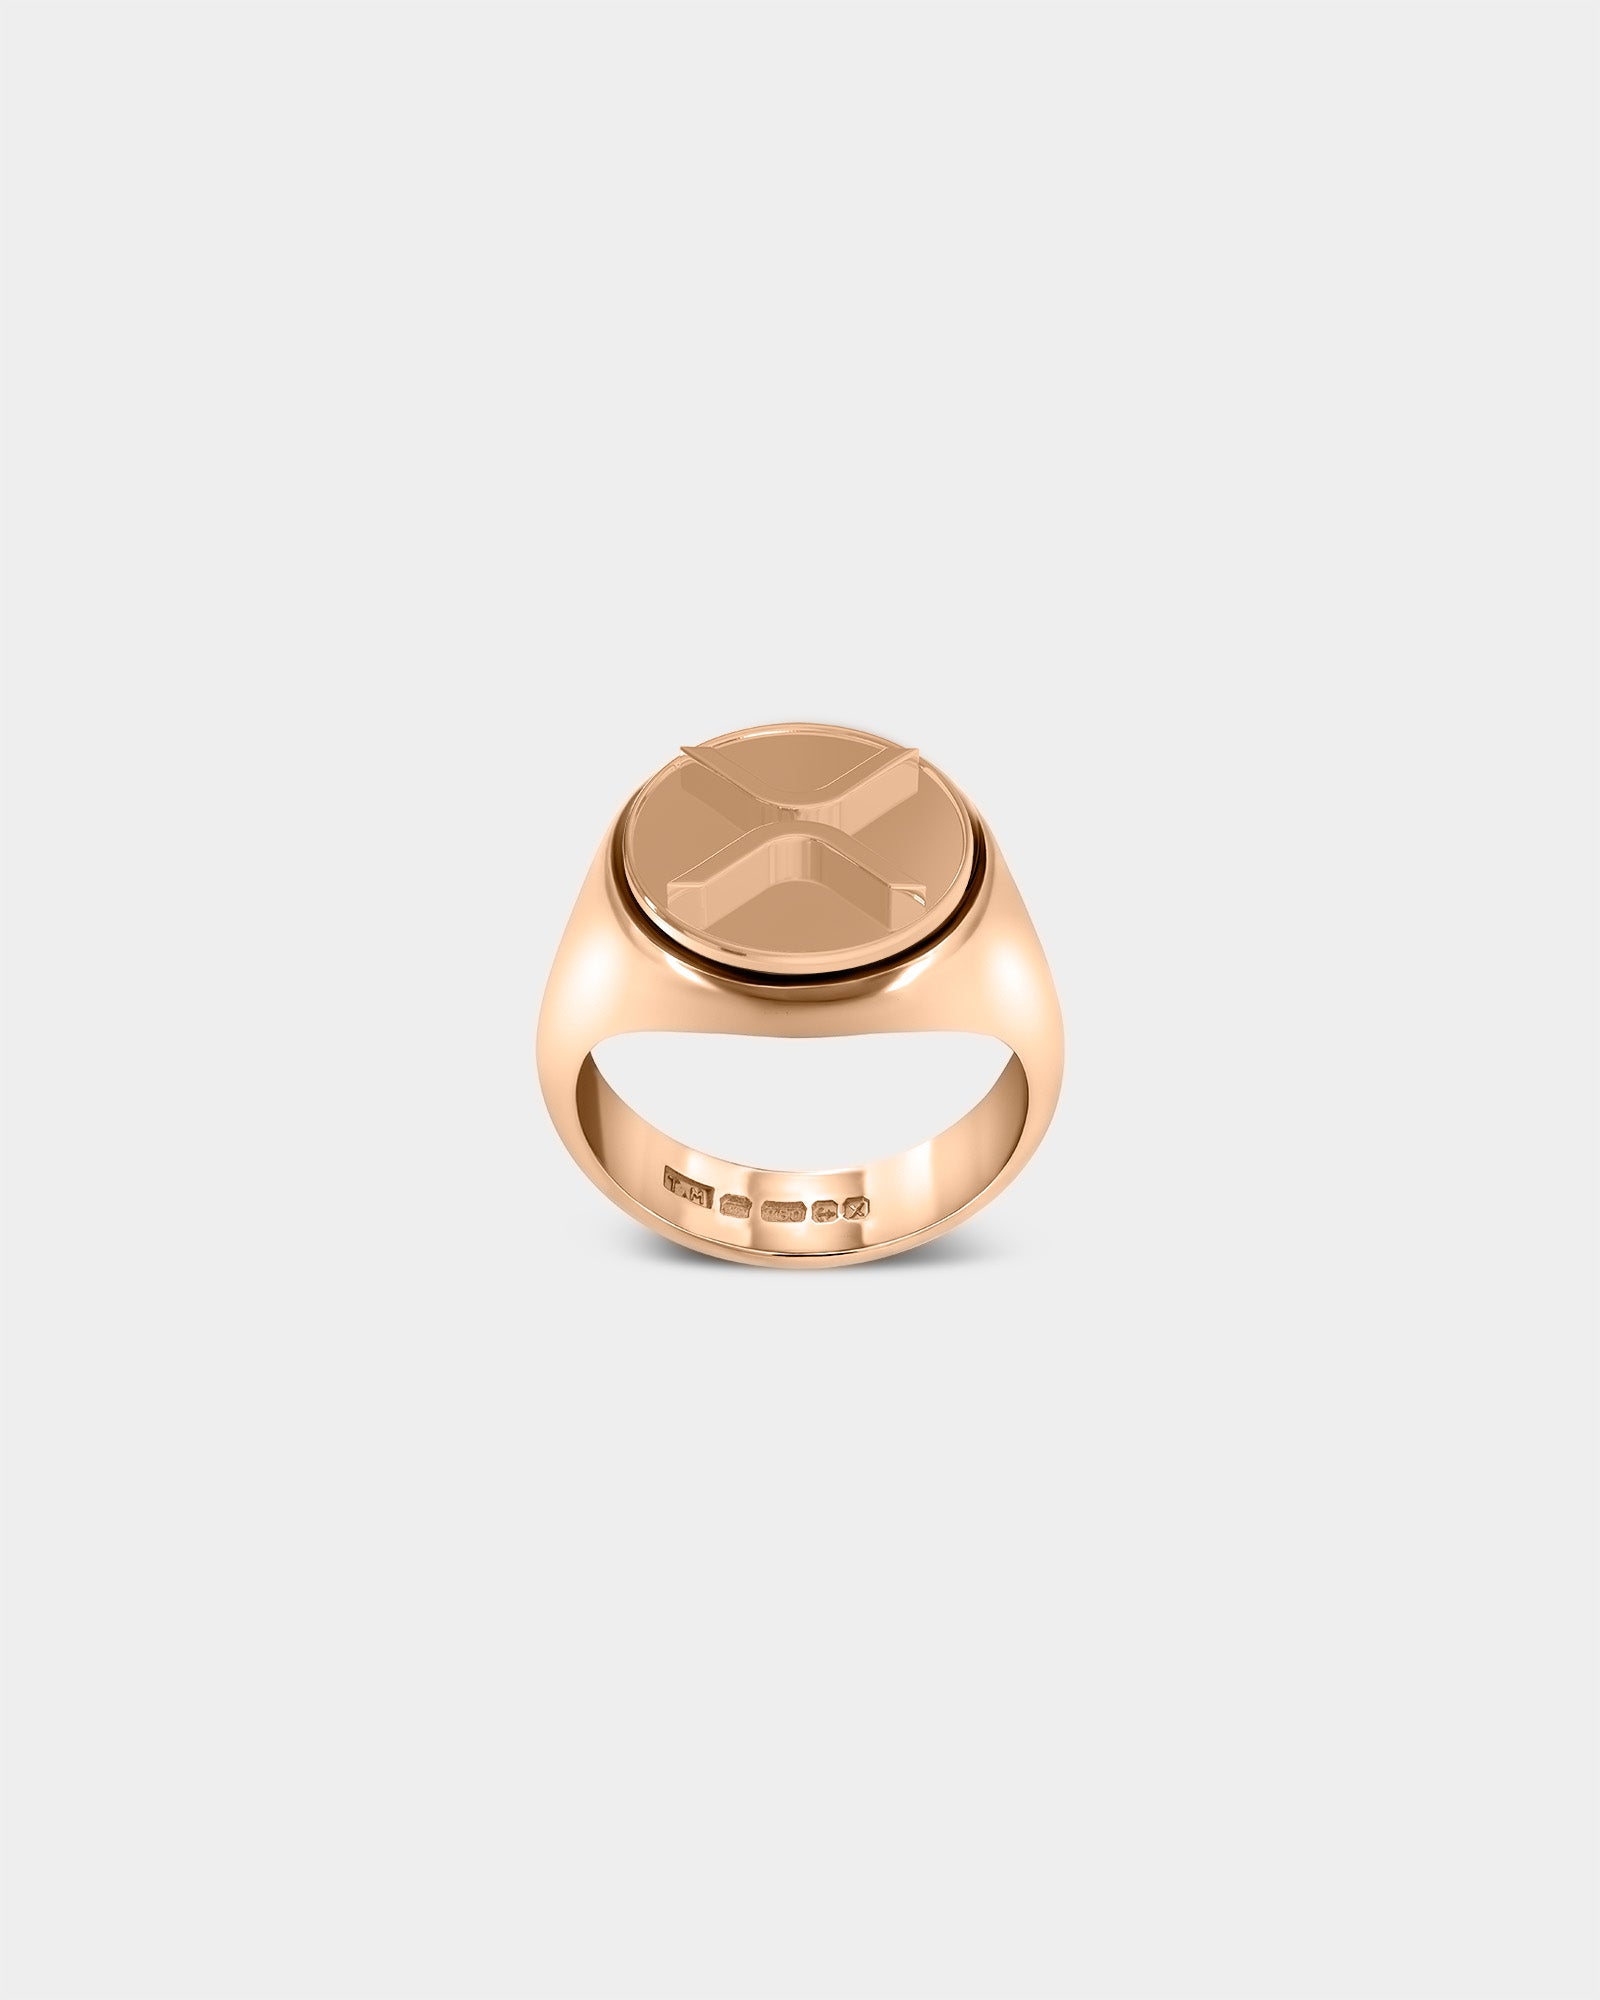 Large Ripple XRP Crypto Ring in 9k Rose Gold by Wilson Grant